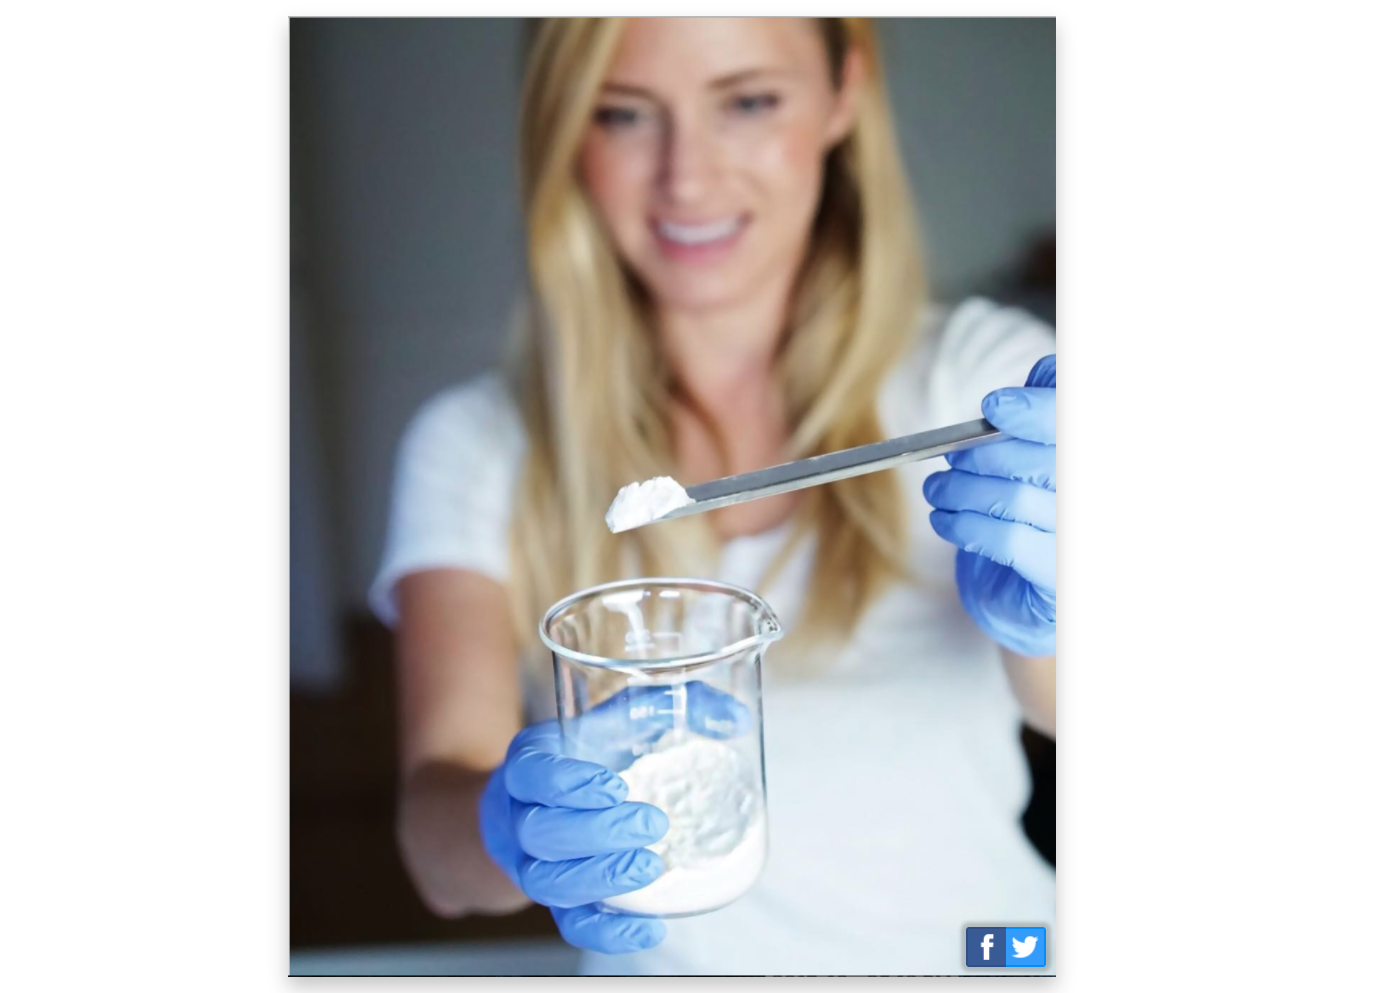 Picture showing a woman working with chemicals